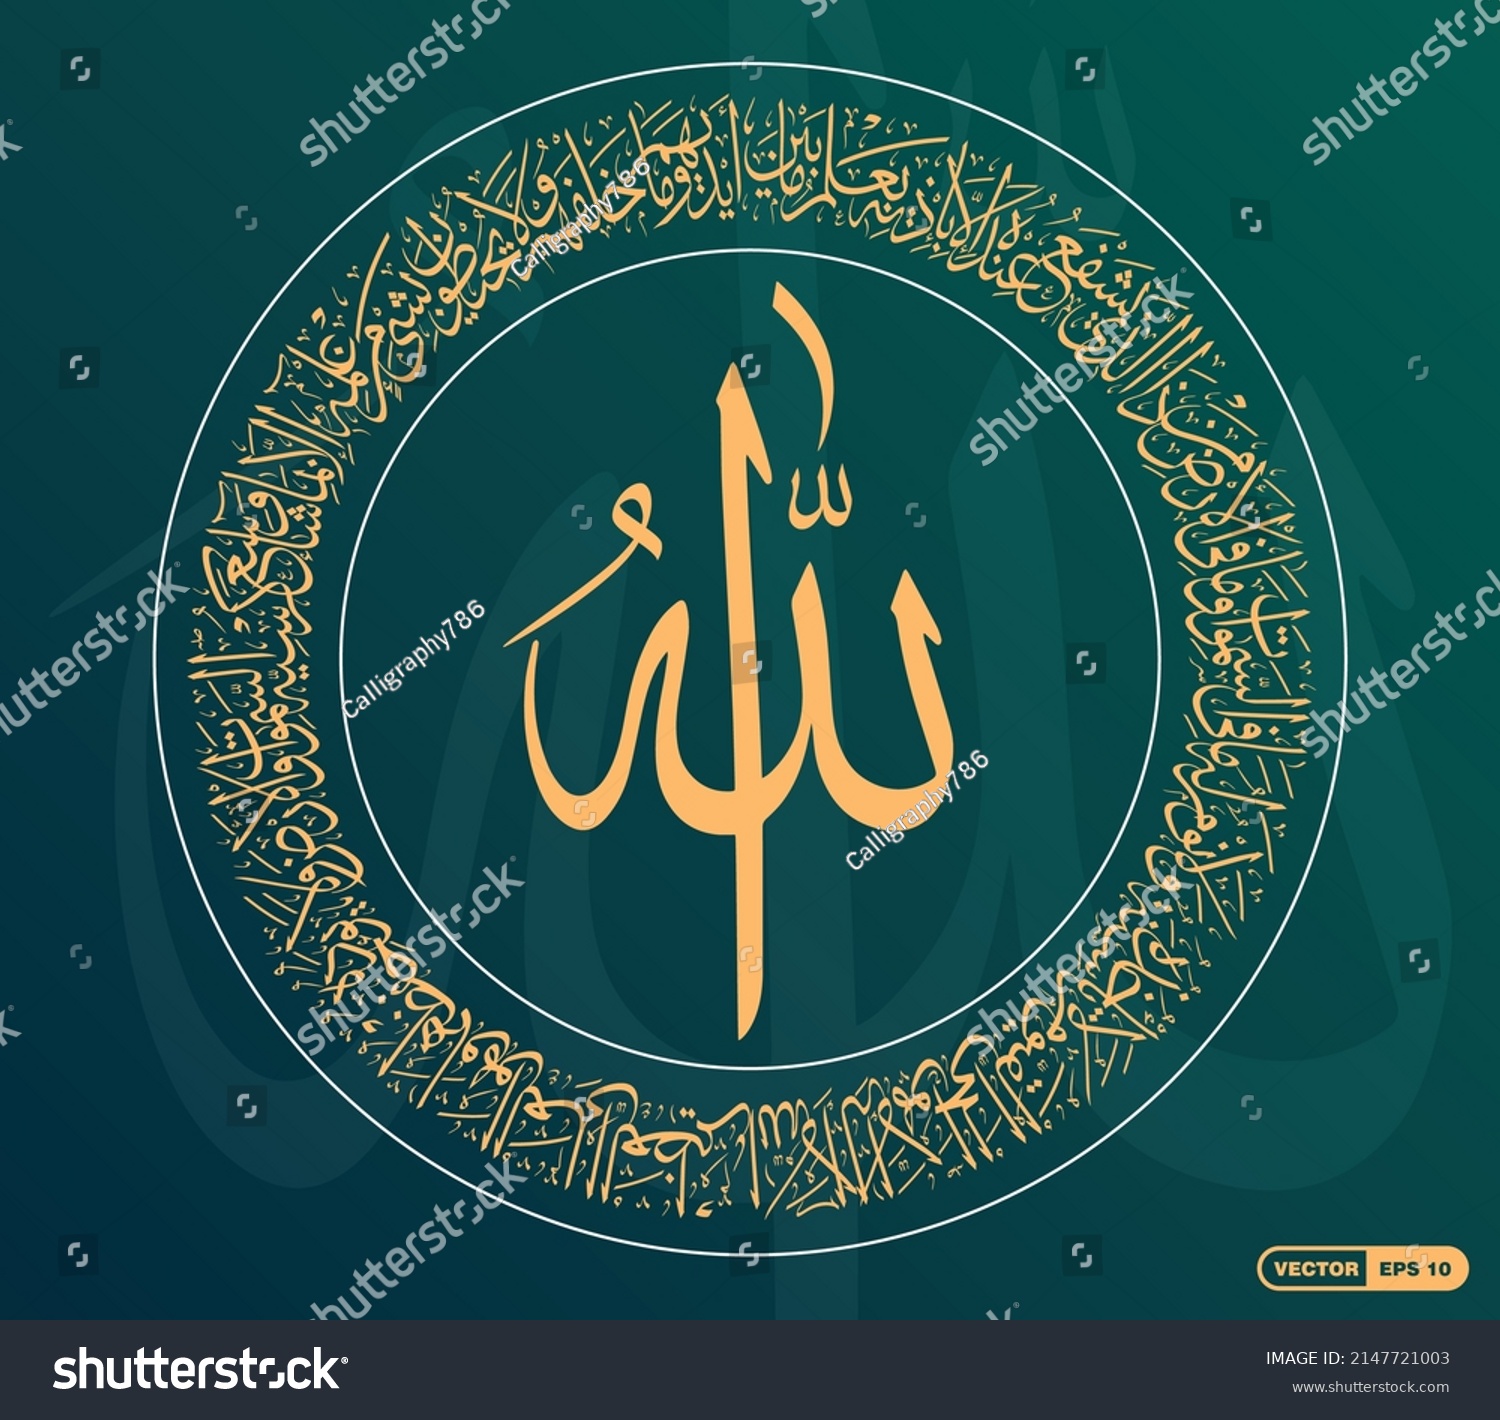 SVG of Vector Calligraphy of Ayat Ul Kursi and middle name 